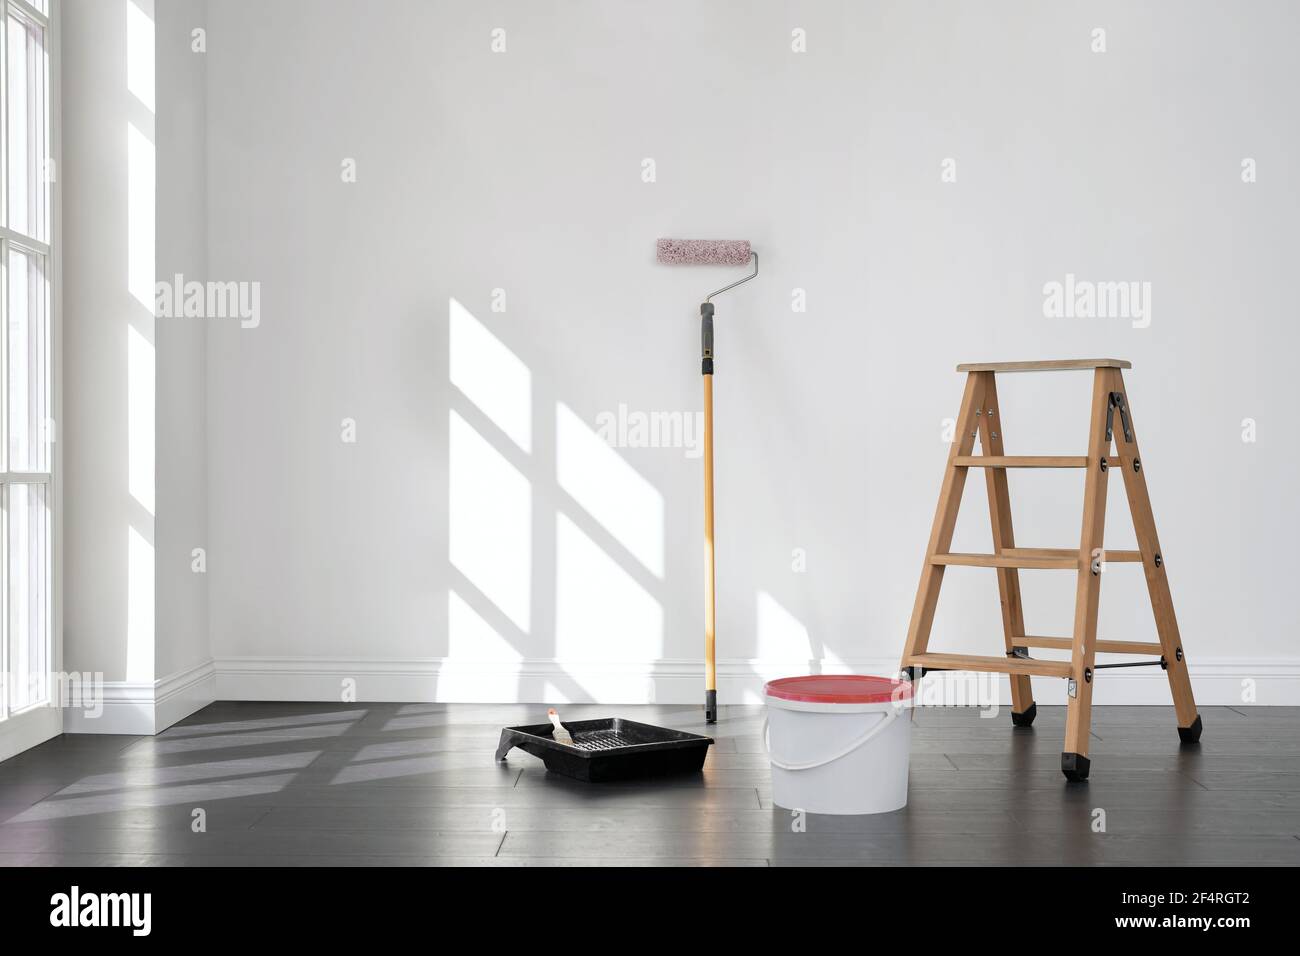 Painting the room, empty apartment ready for renovation, with copy space Stock Photo